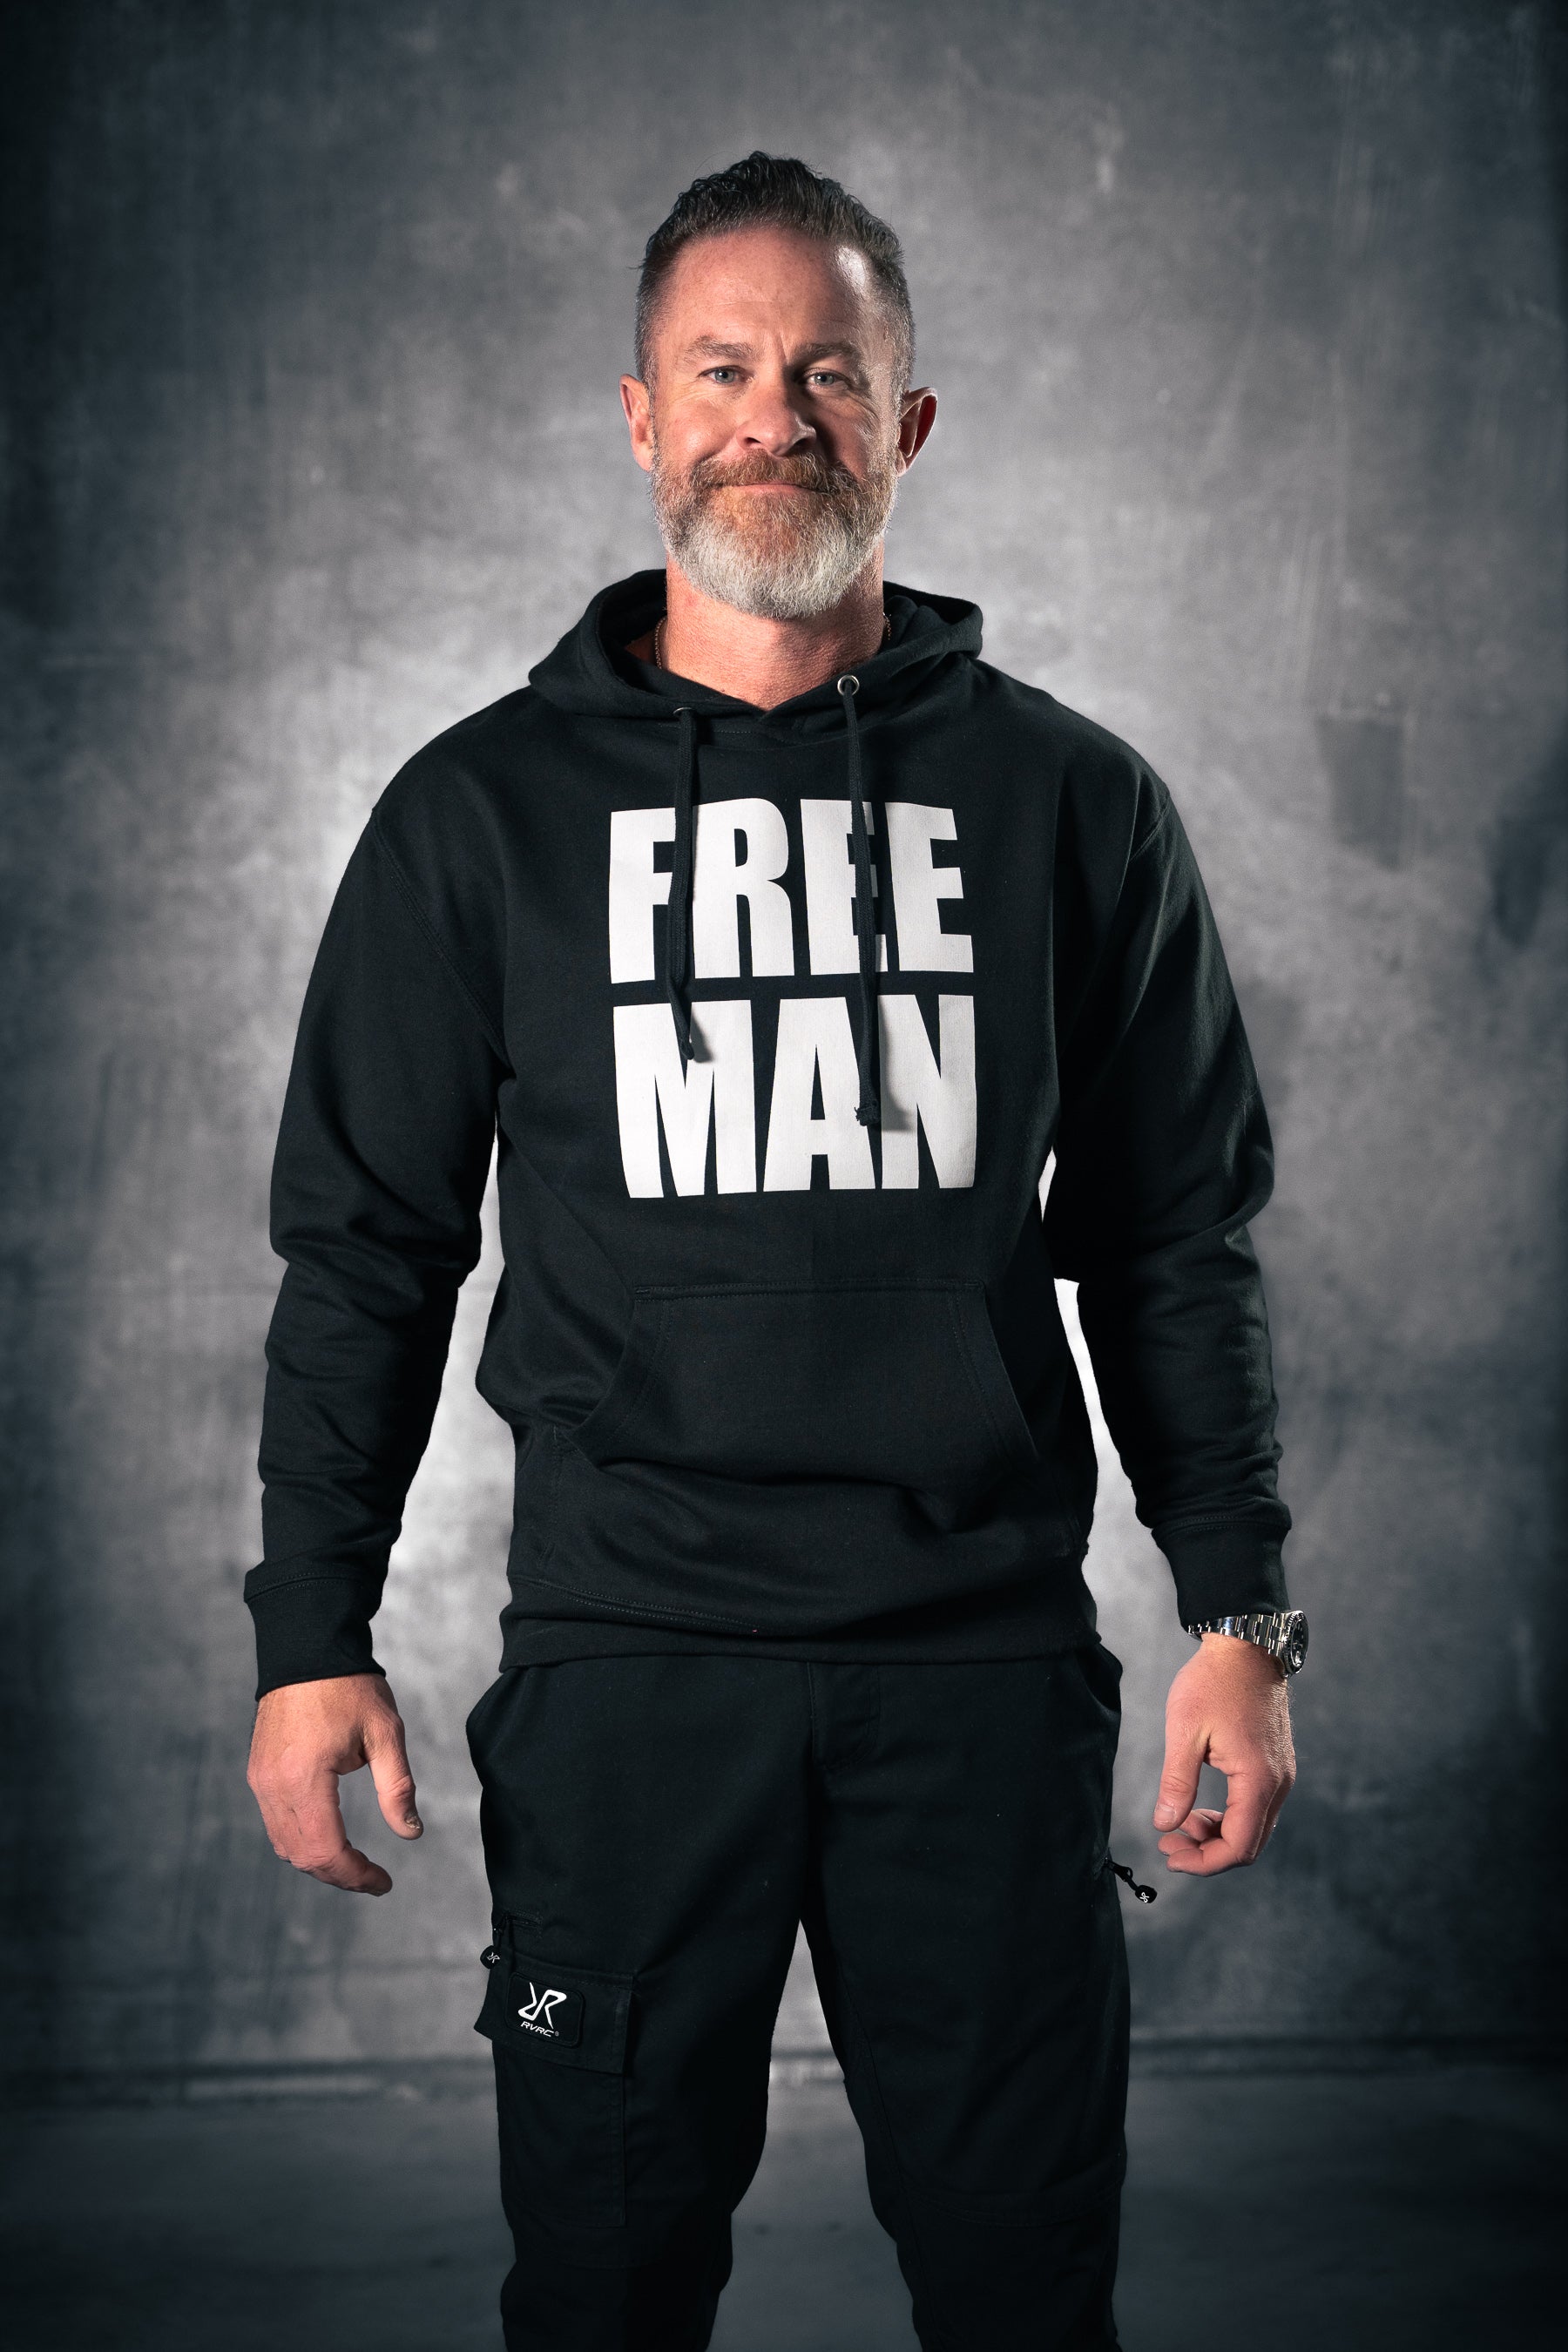 Lions Not Sheep "Free Man" Unisex Pullover Hoodie - Lions Not Sheep ®